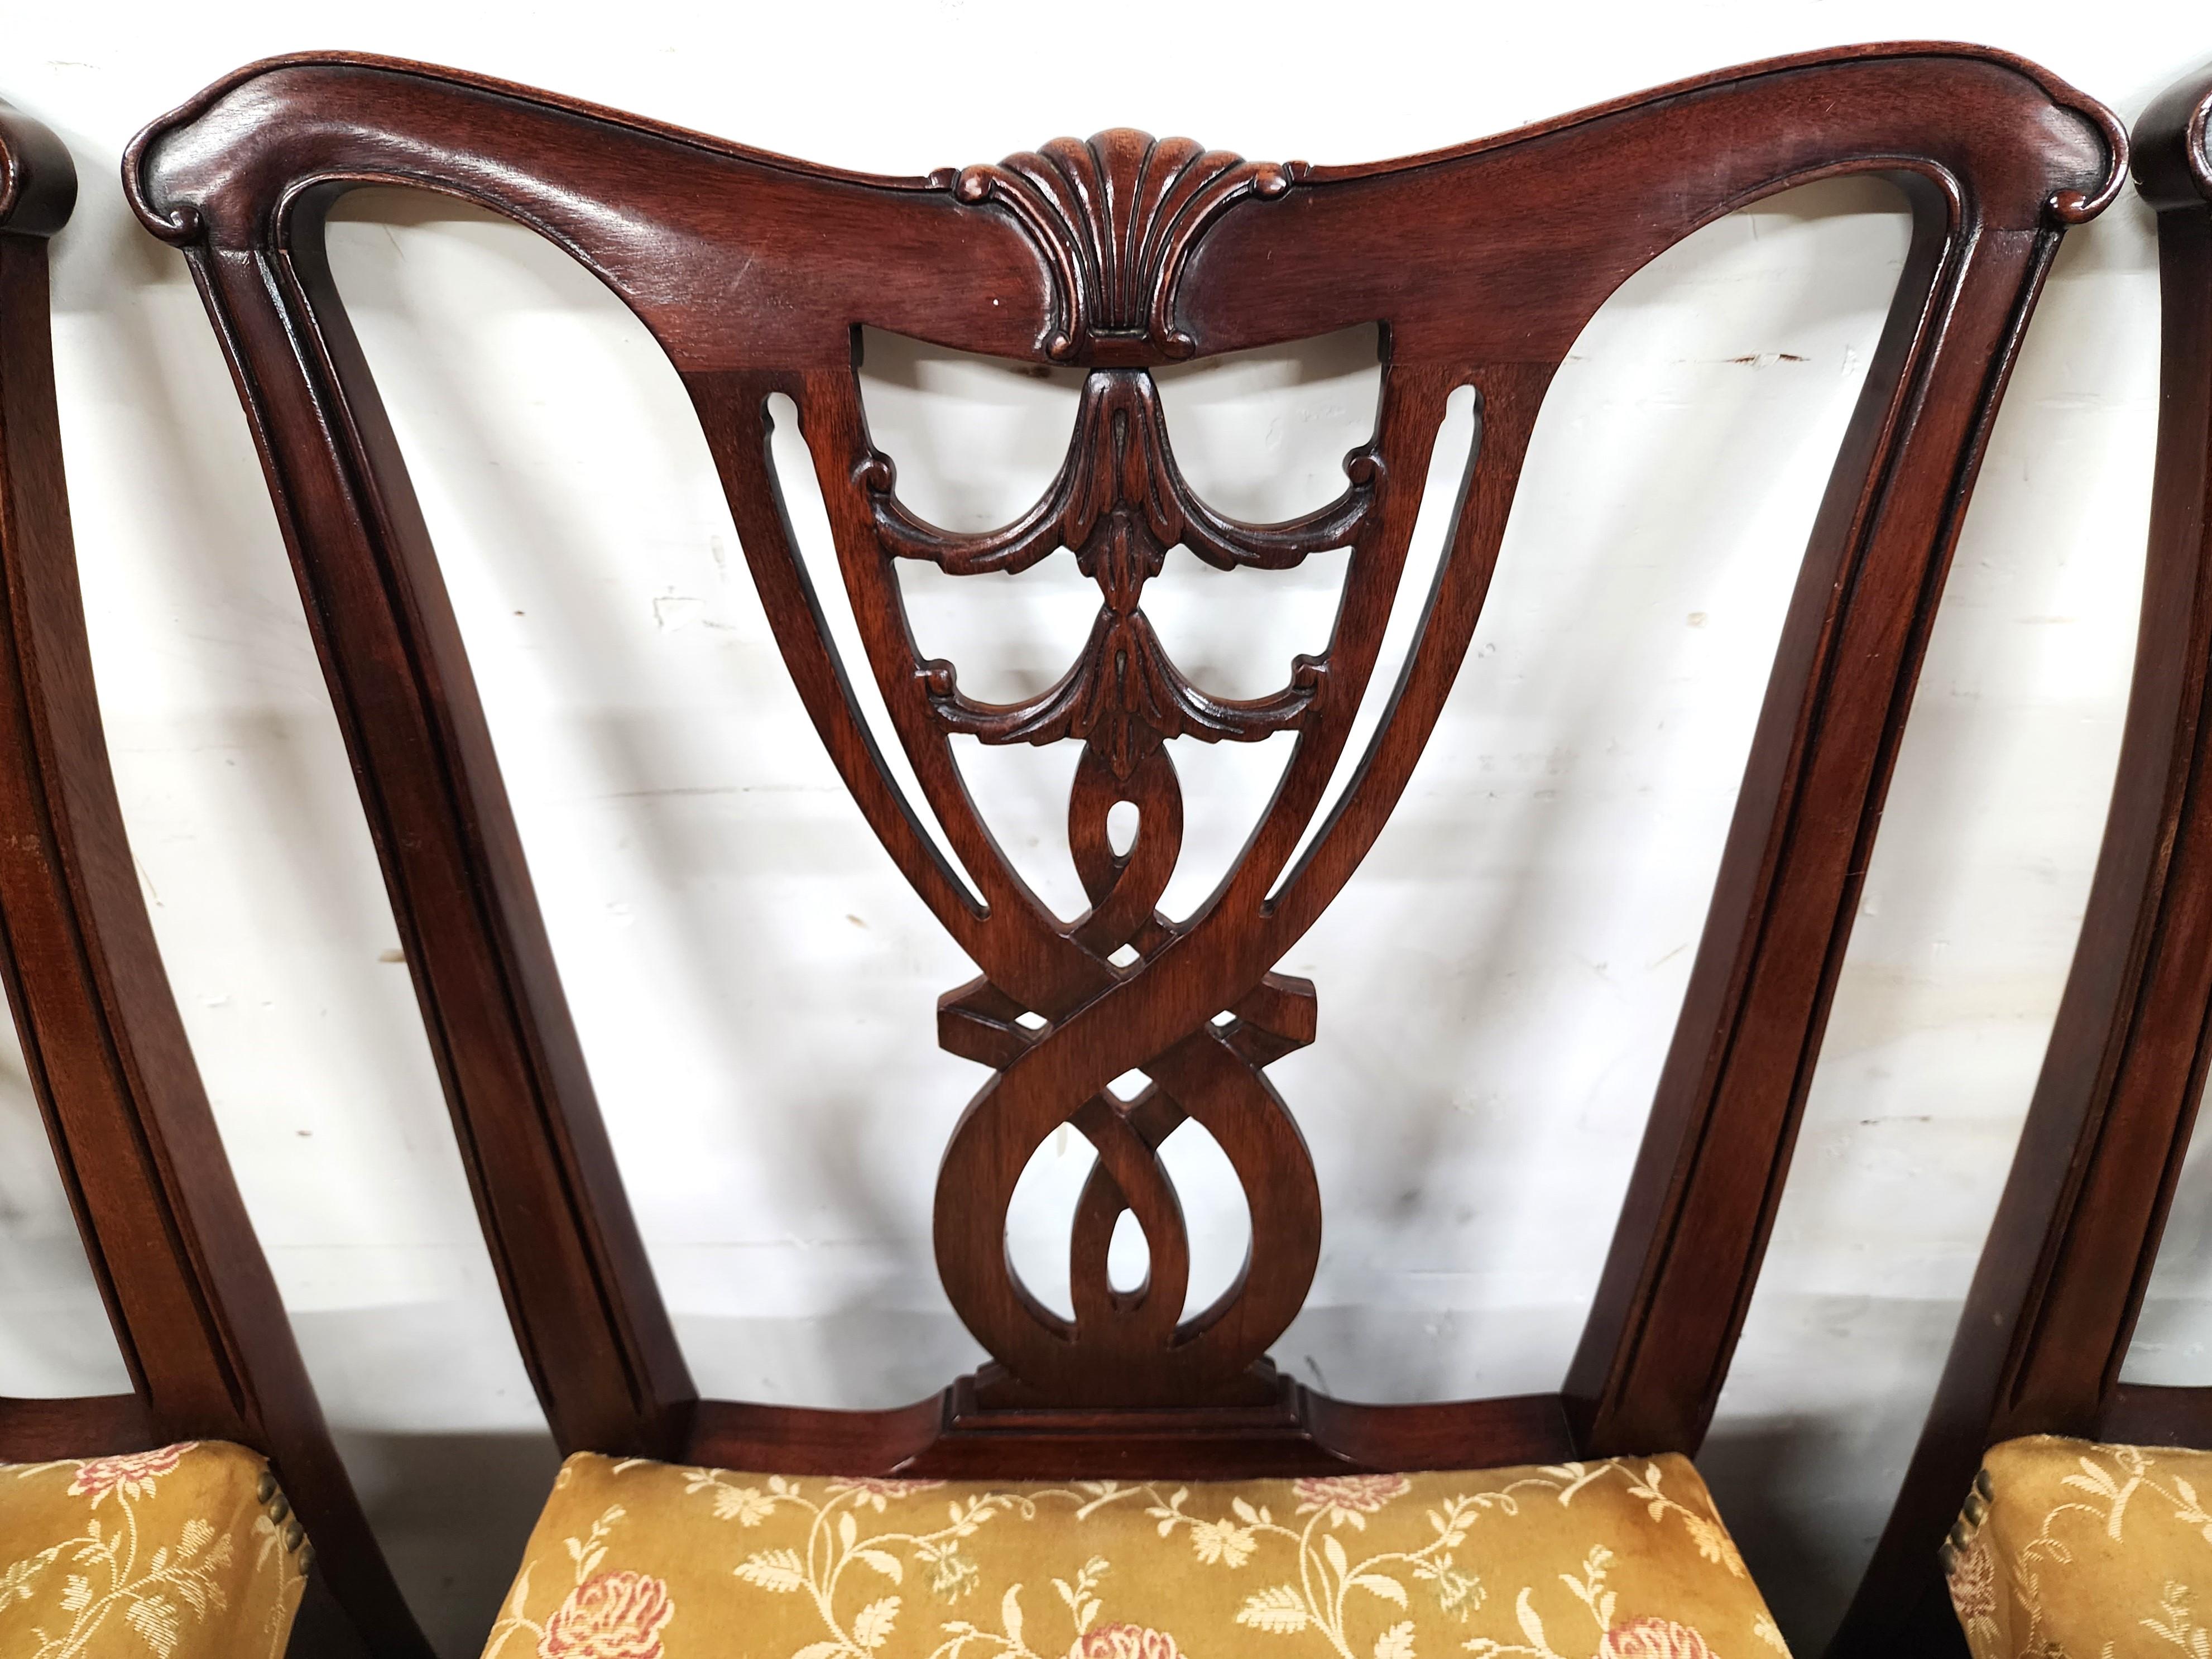 For FULL item description click on CONTINUE READING at the bottom of this page.

Offering One Of Our Recent Palm Beach Estate Fine Furniture Acquisitions Of A 
Set of 6 Antique Chippendale Dining Chairs circa 1900
Set includes 4 side and 2